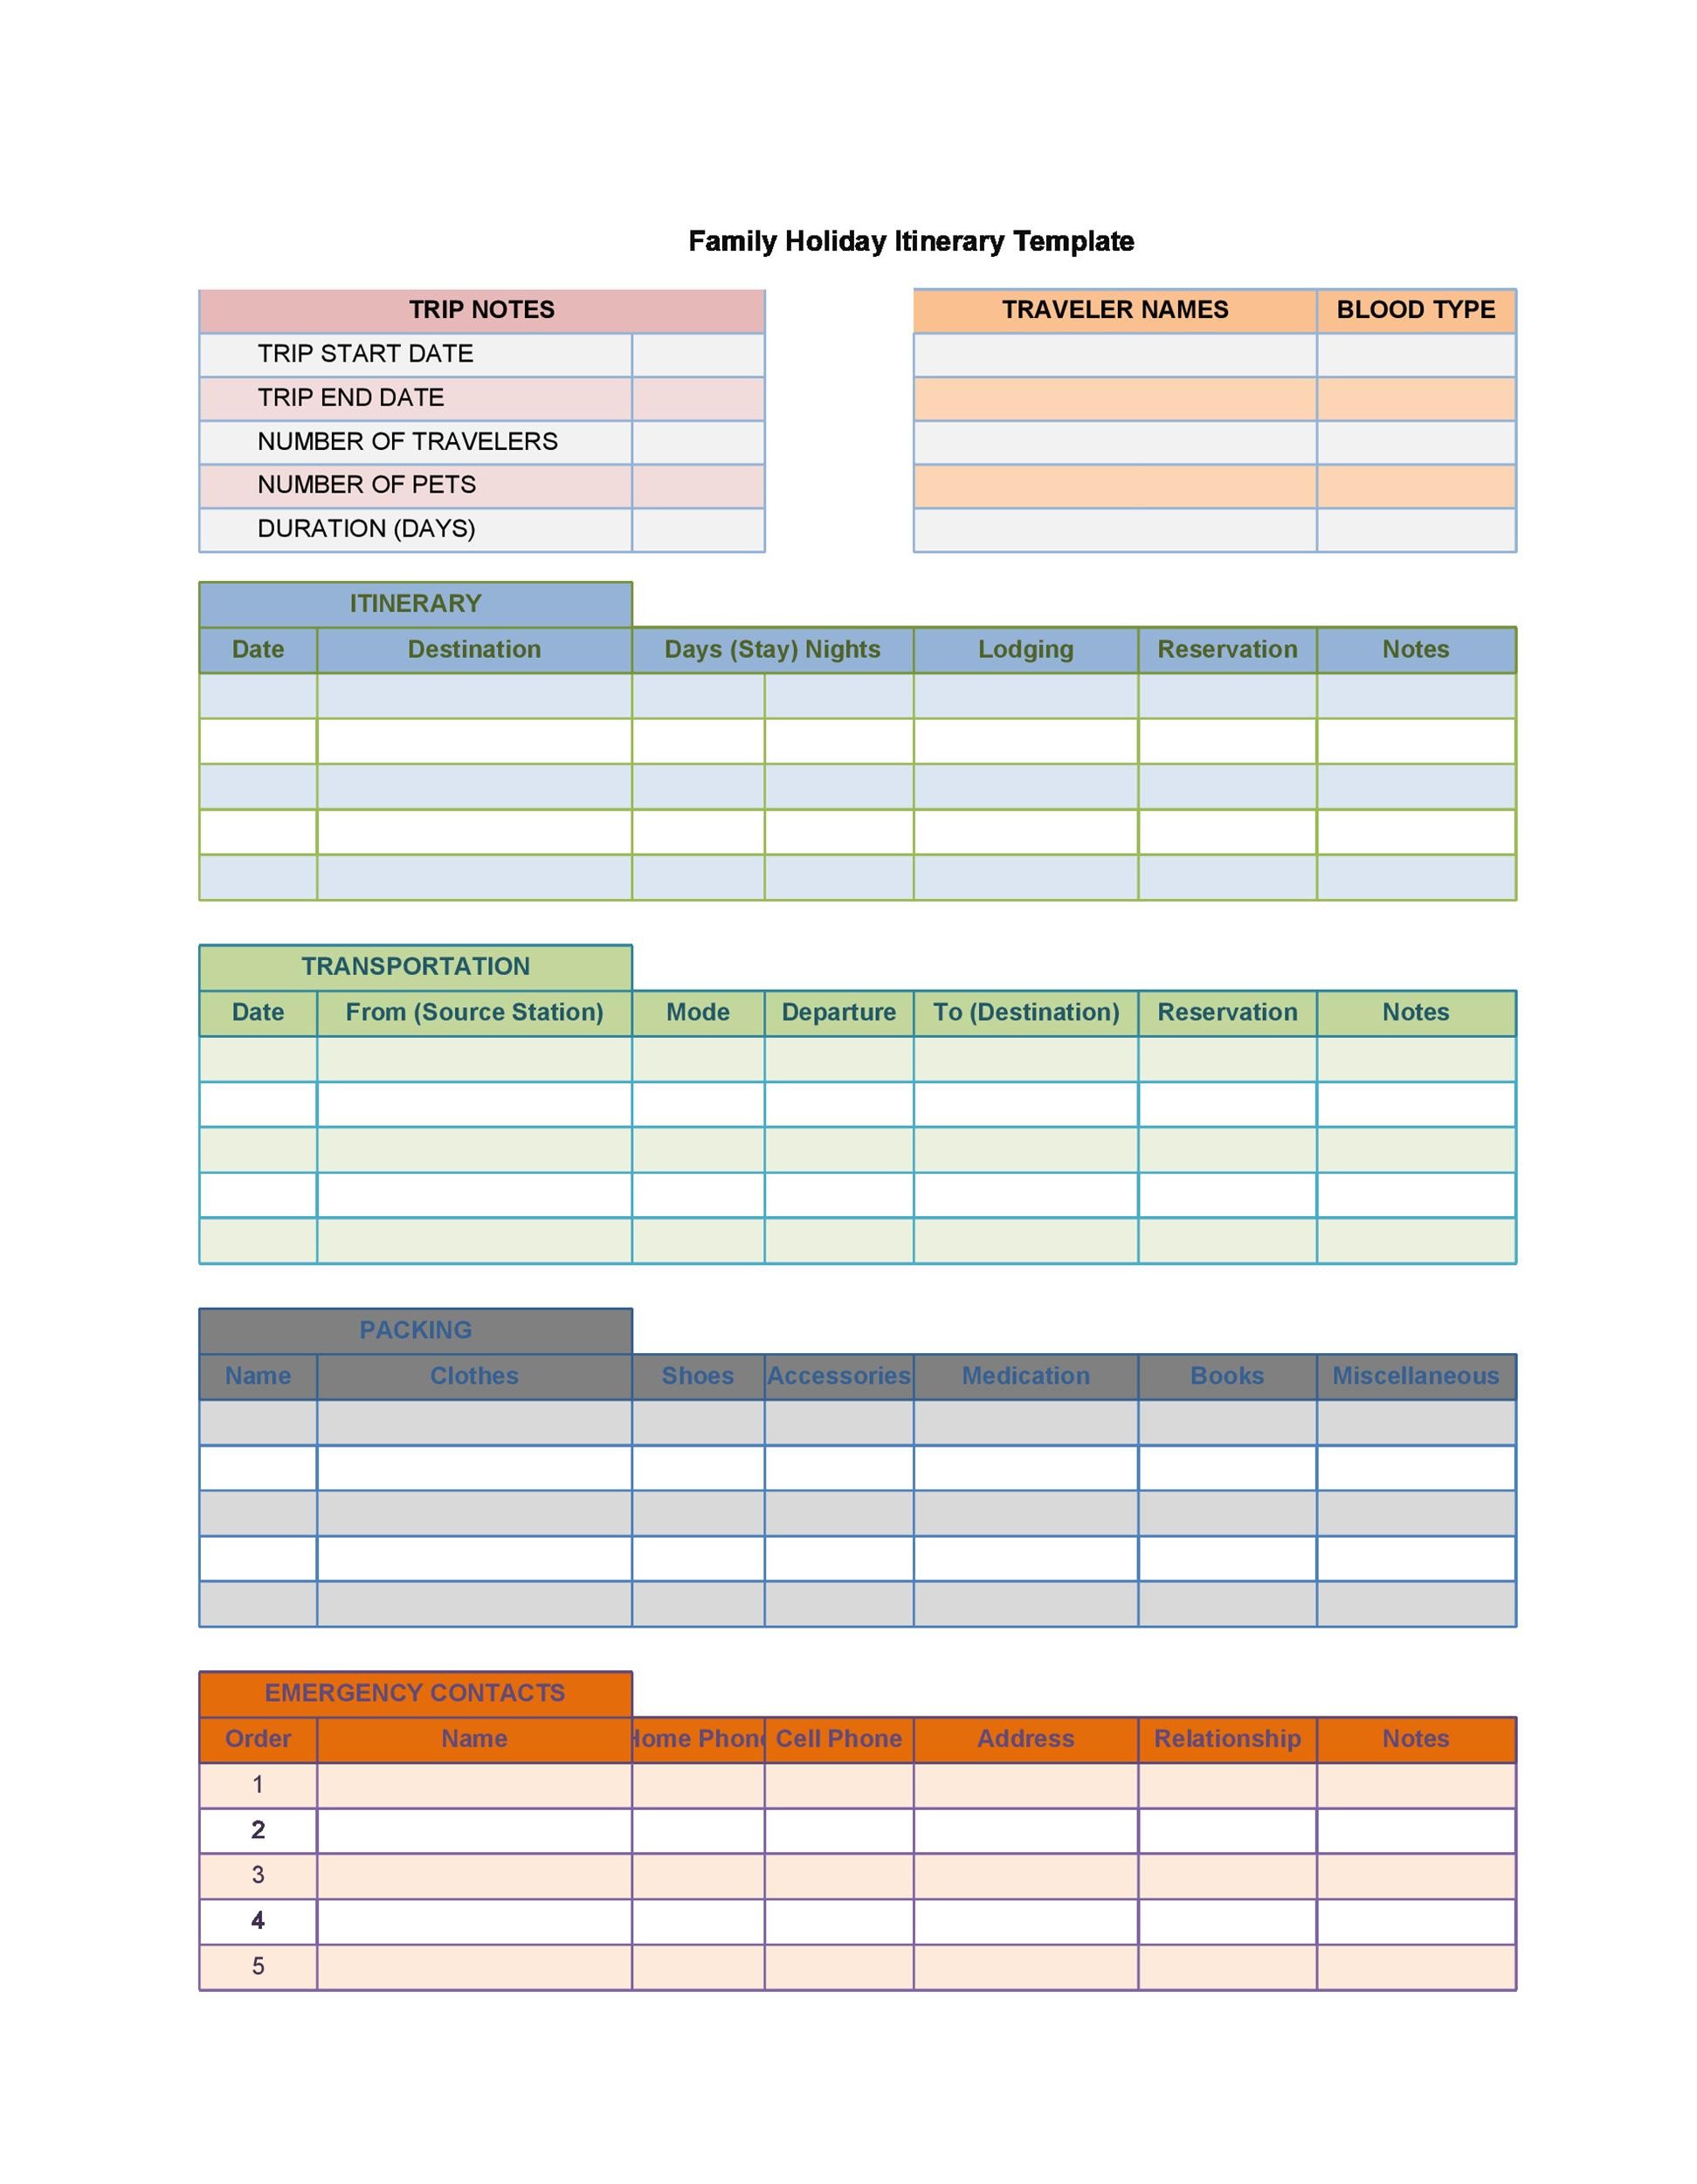 paper-stationery-pdf-travel-planning-printable-travel-itinerary-travel